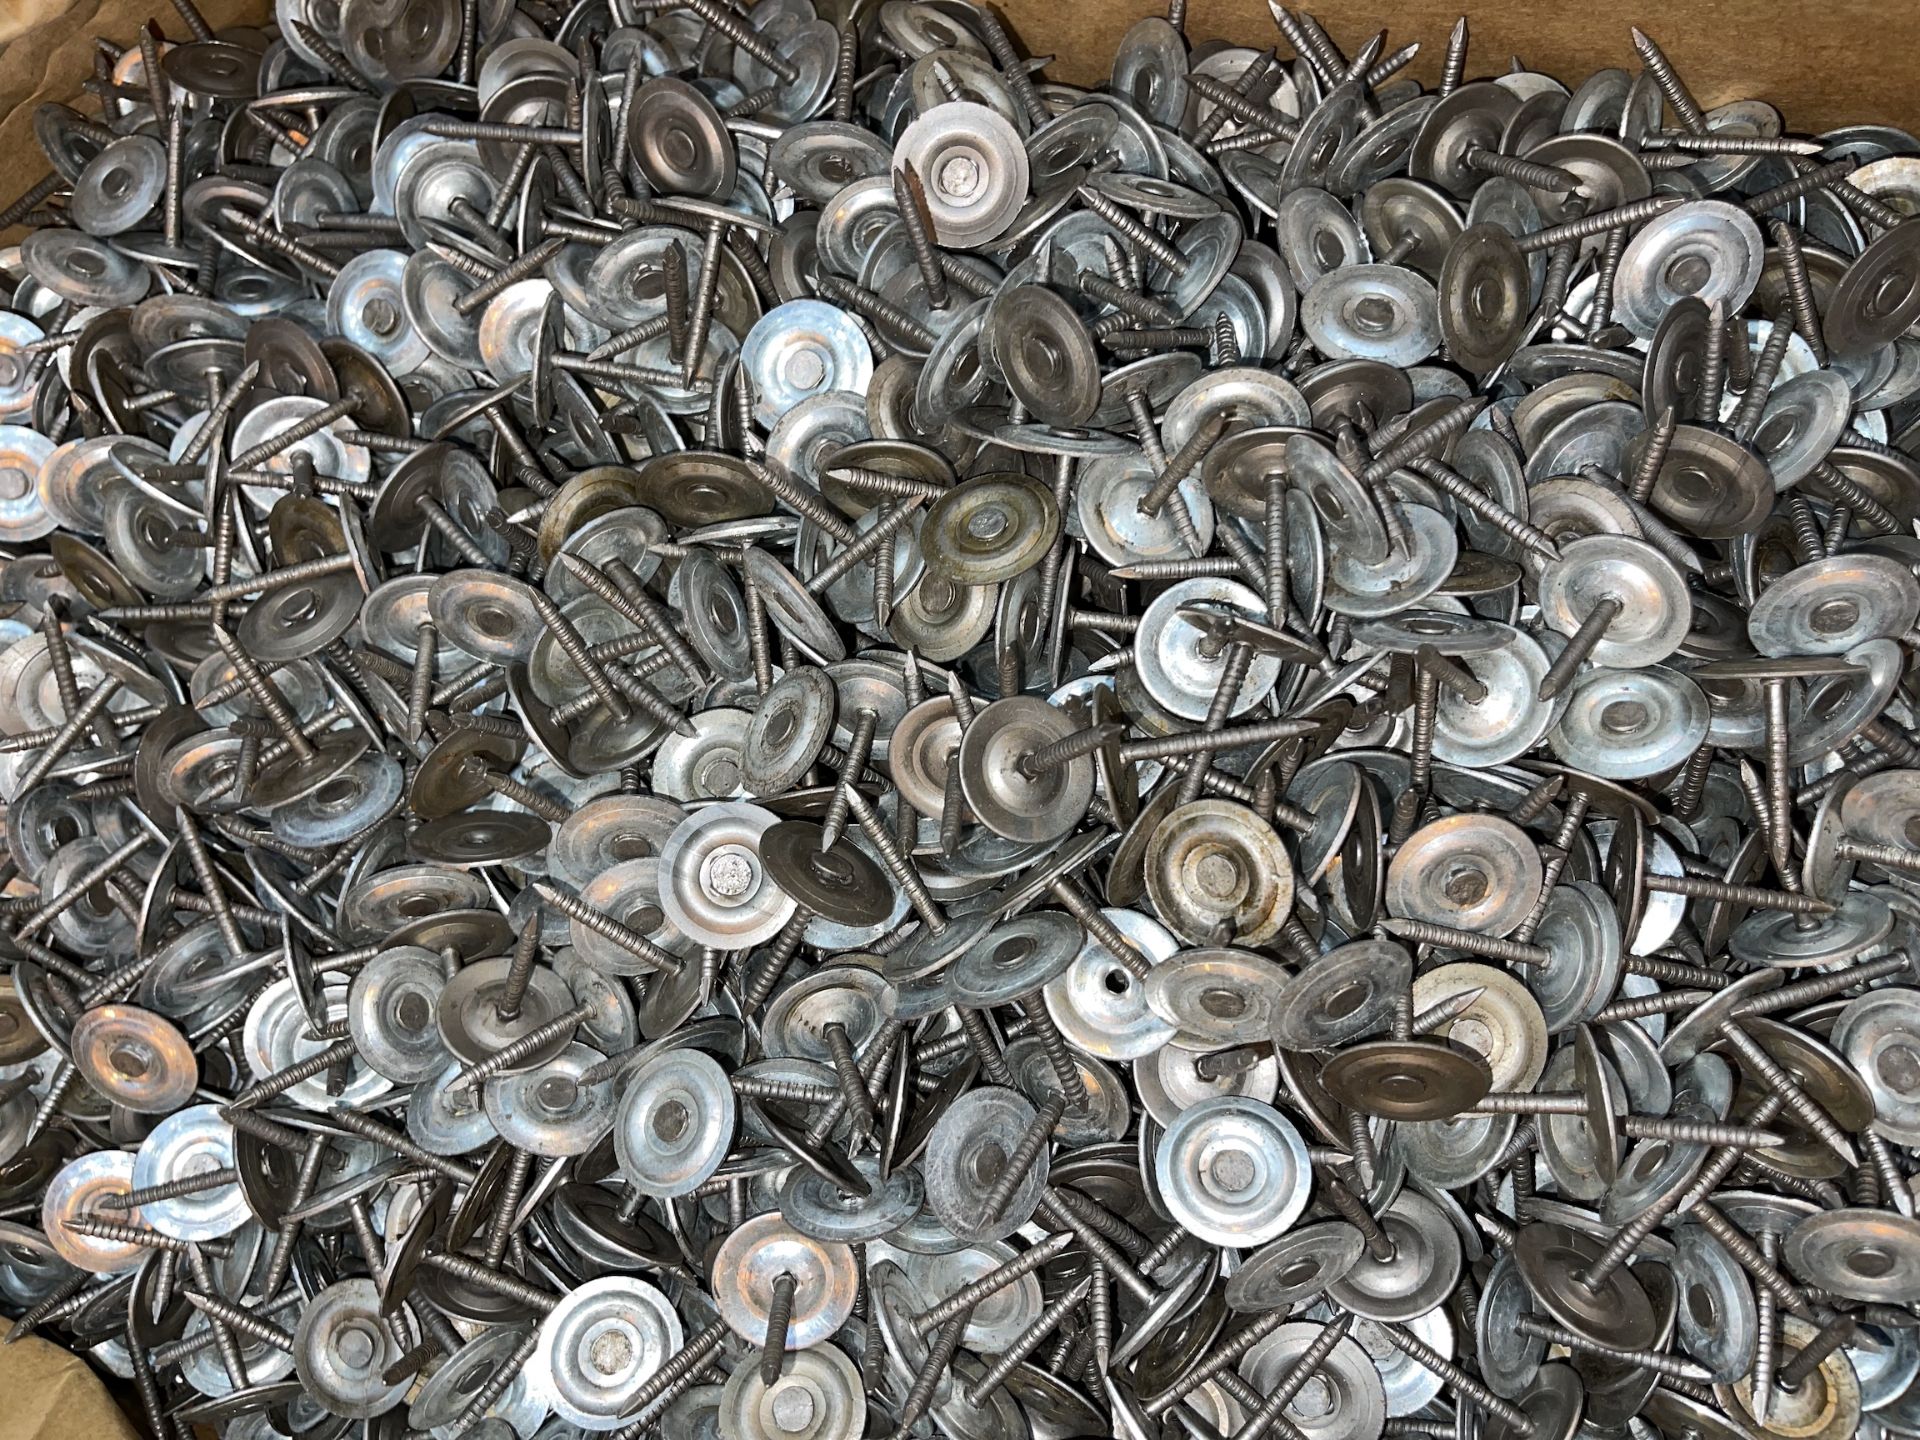 Lot of Bulk Roofing Nails 1-1/4 X .120 (AM39) - Lester, PA - Image 5 of 7